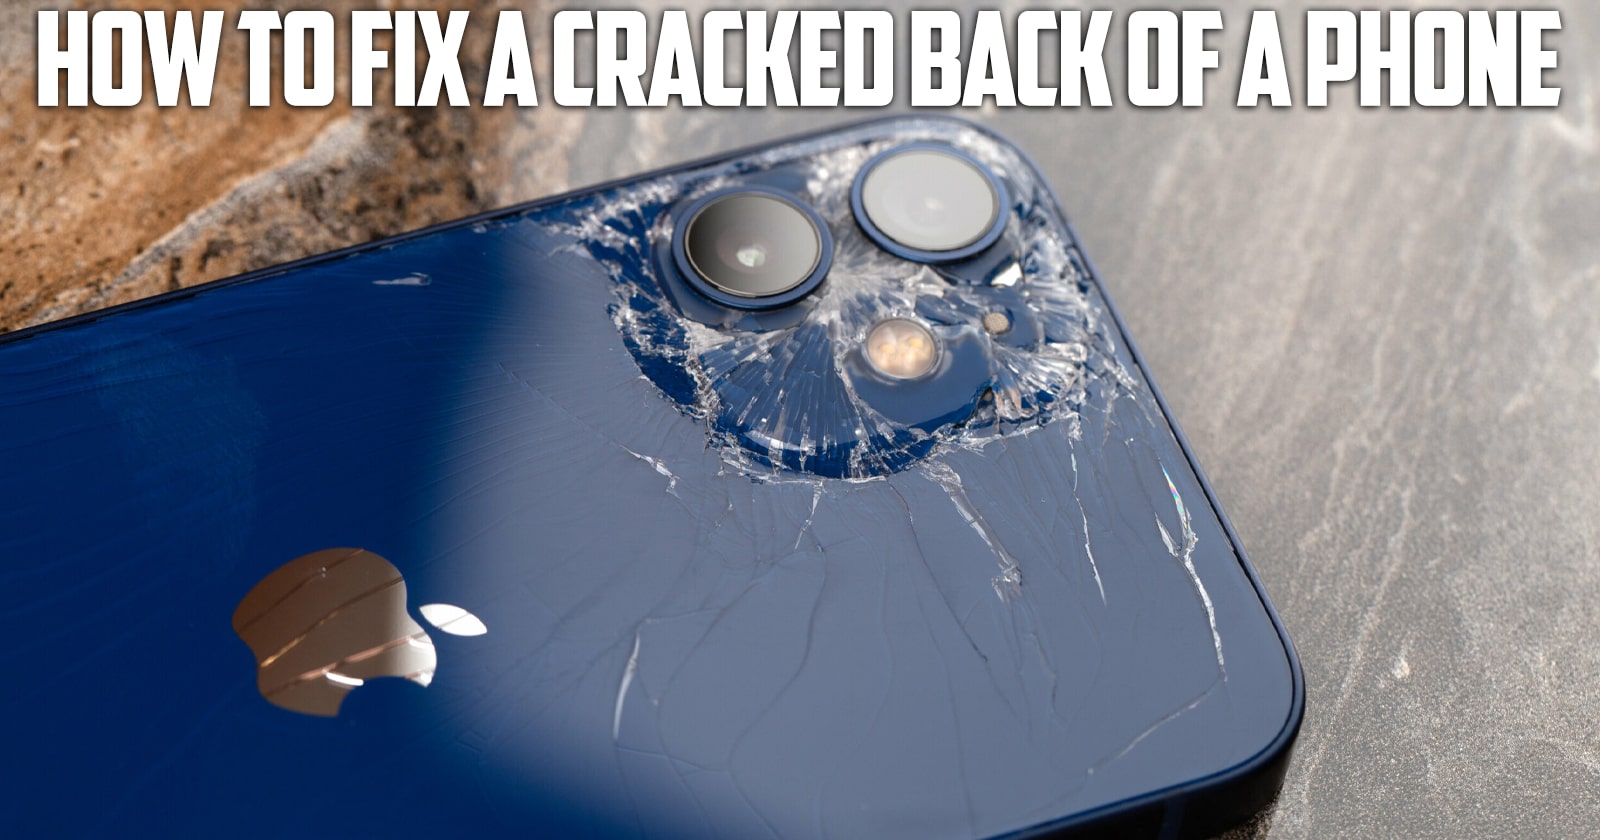 How to Fix a Cracked Back of a Phone